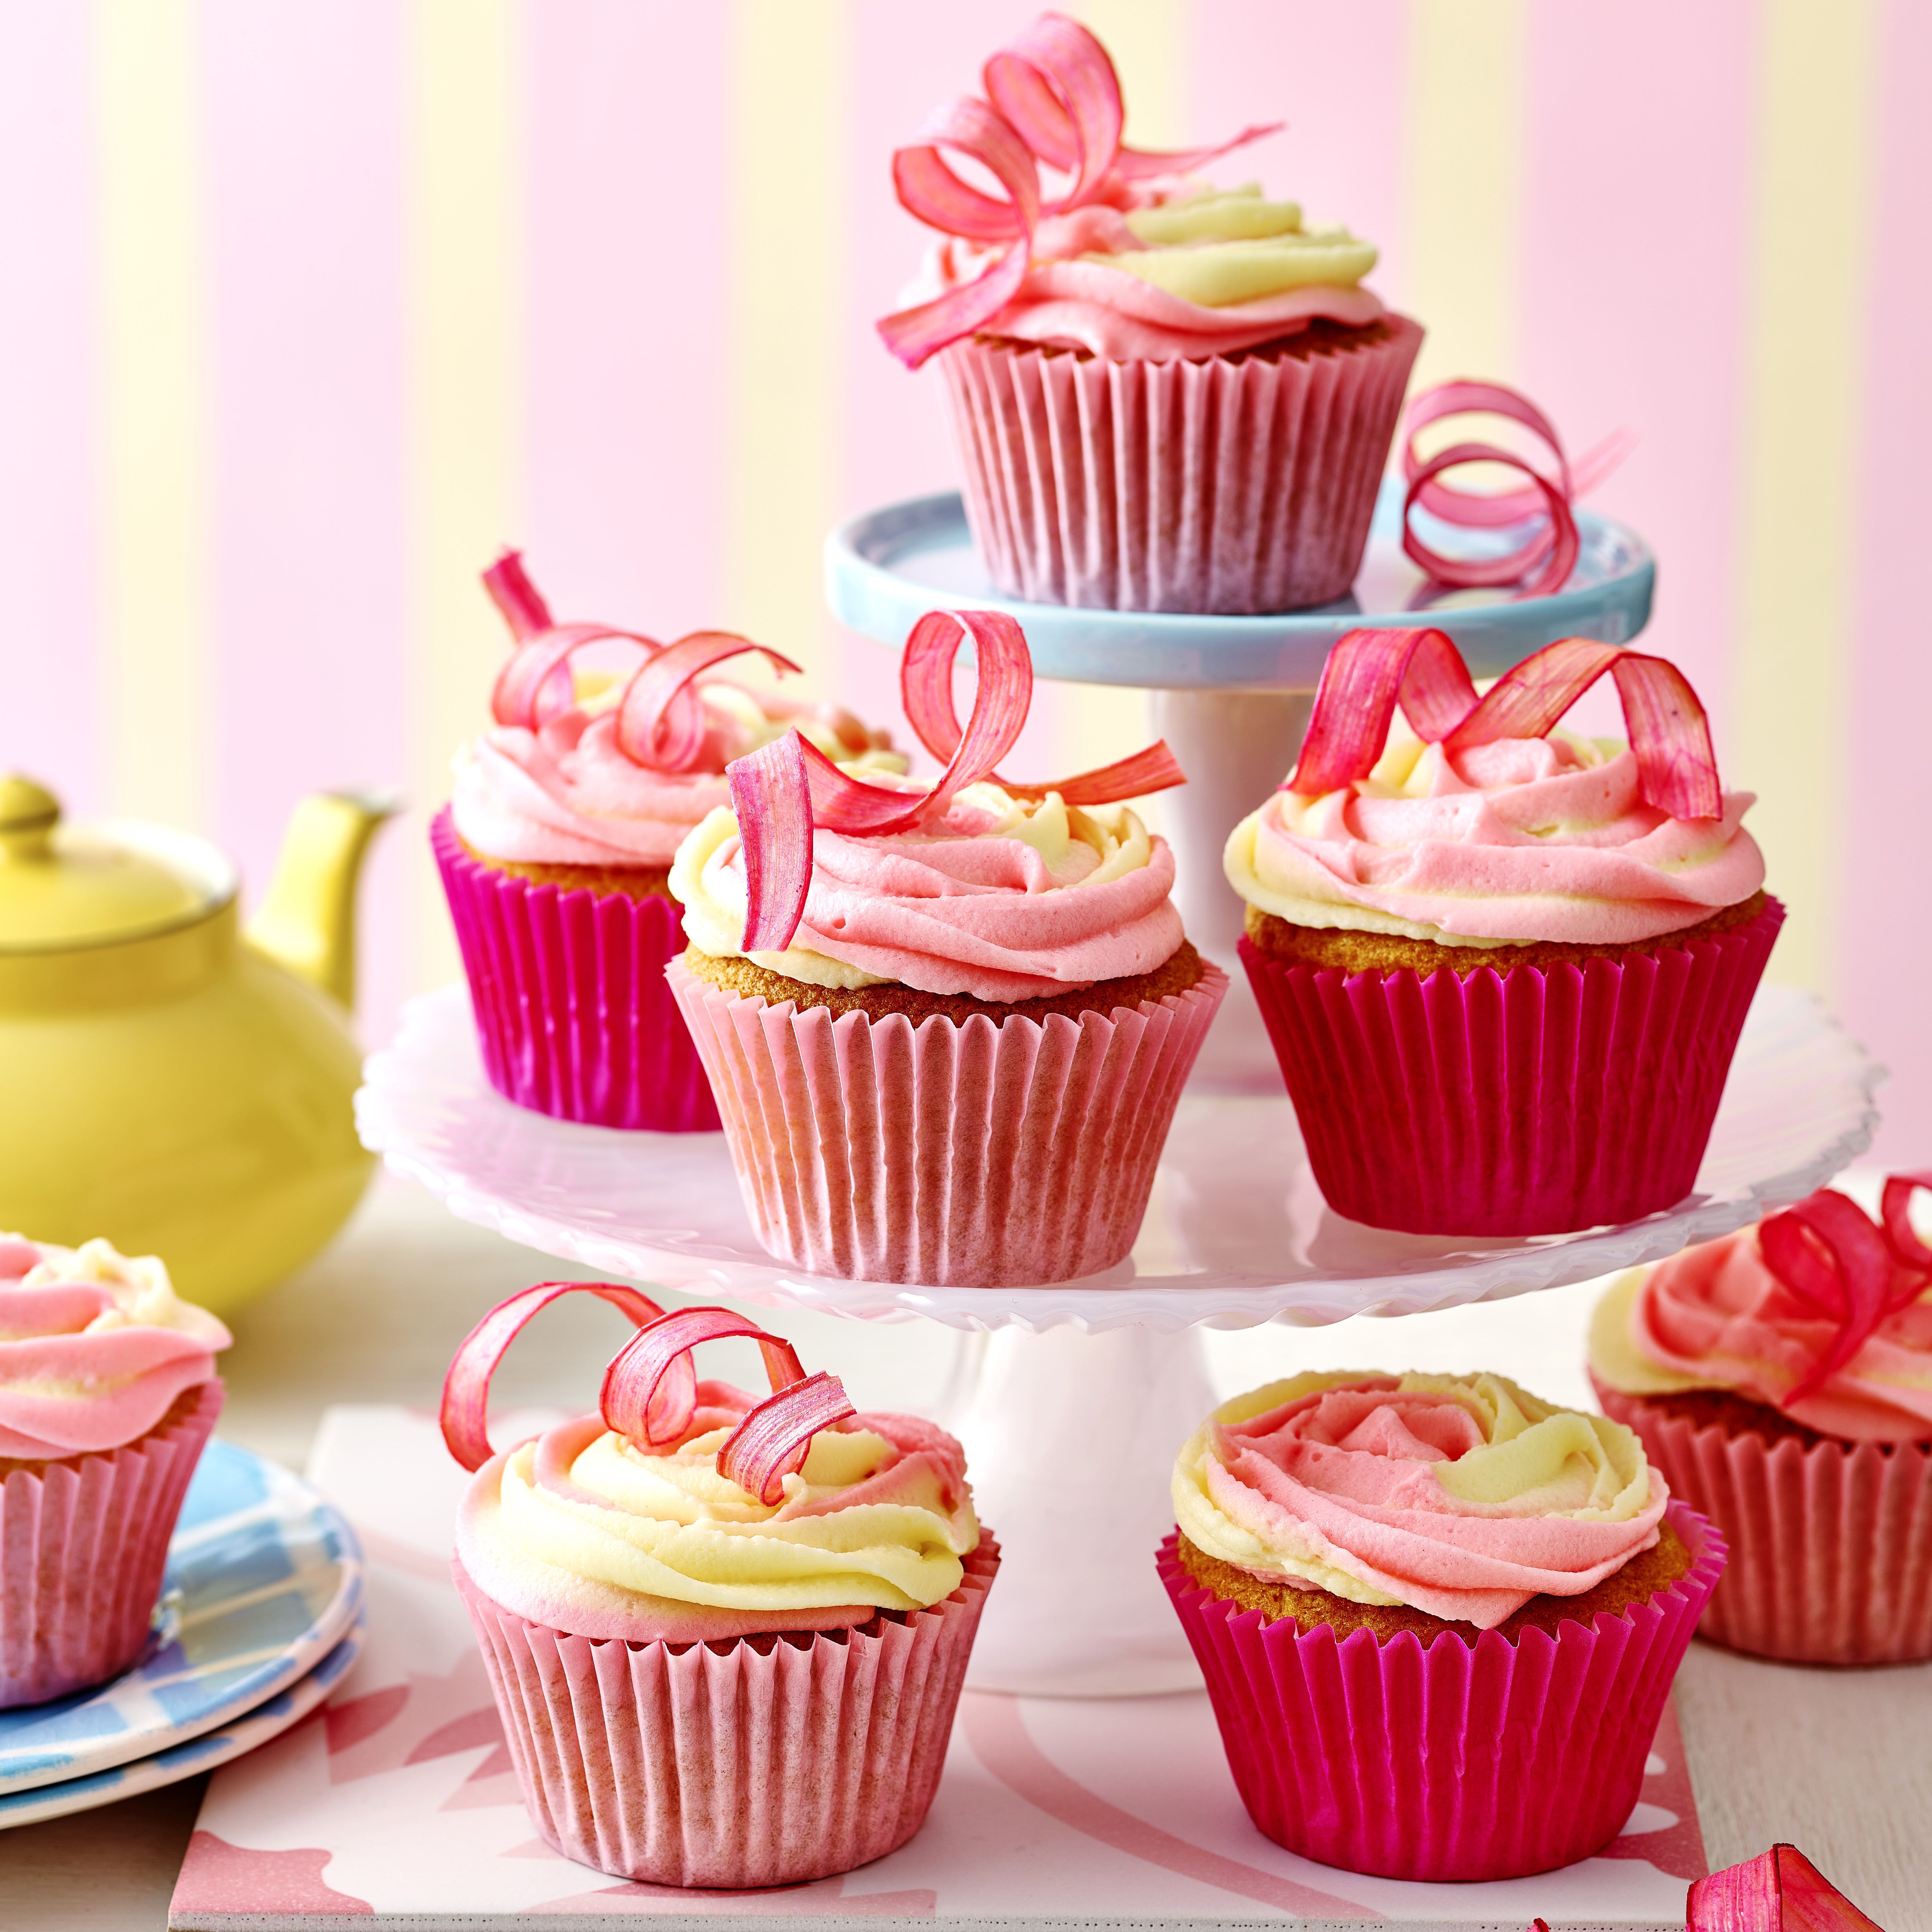 Cupcake Research- Tips for bakers!